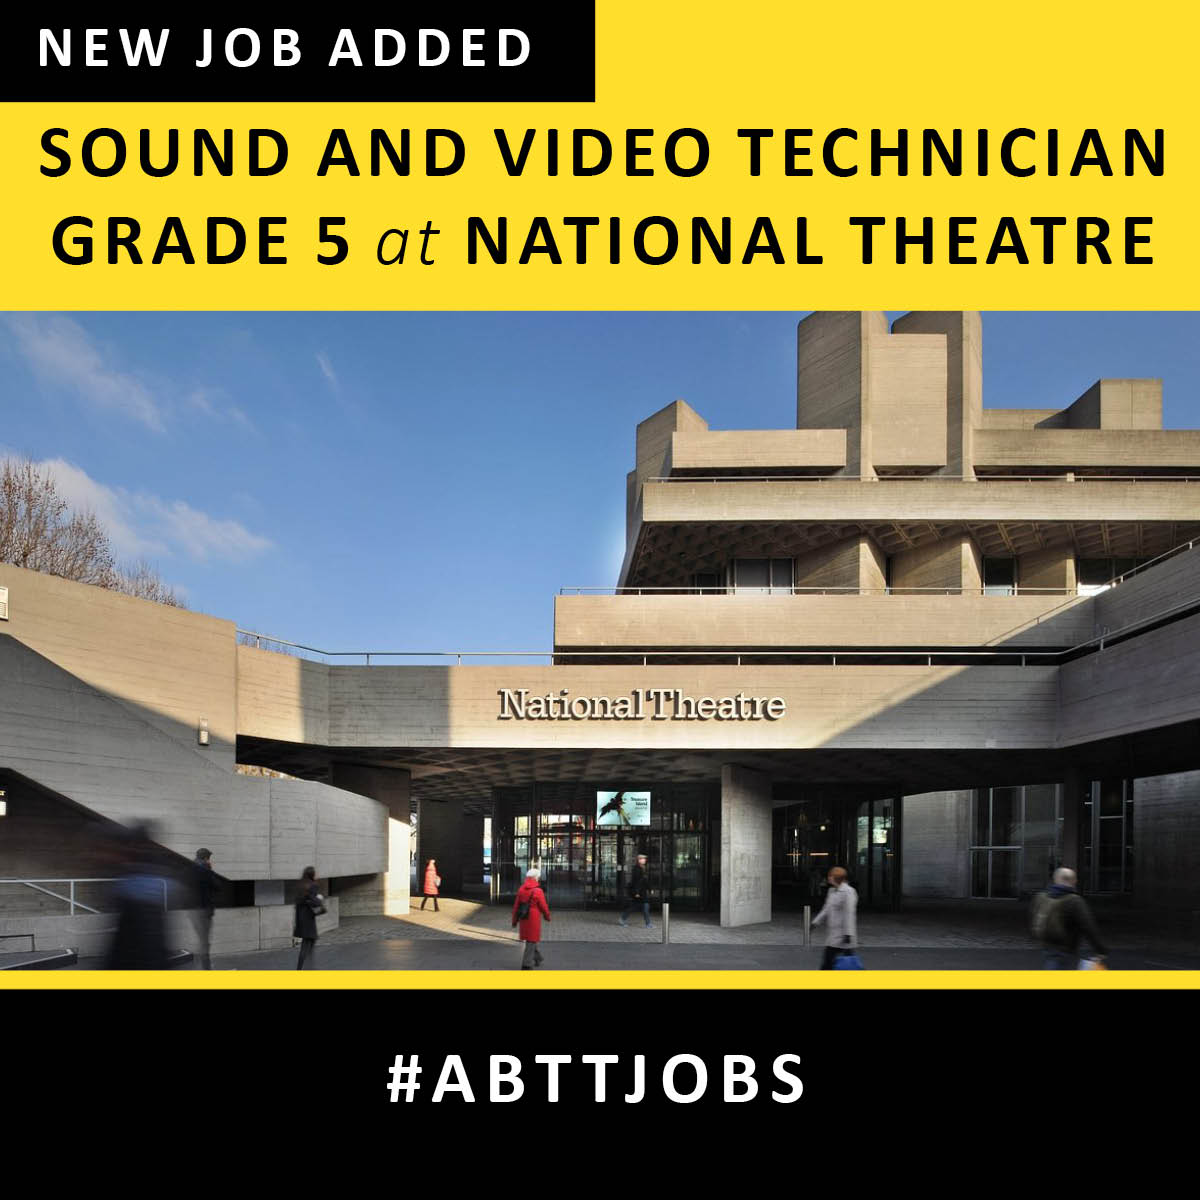 The National Theatre are looking for a Sound and Video Technician Grade 5 to join their team. This new role provides opportunities for technicians to gain experience and on-the-job training.

Find out more and apply here: abtt.org.uk/jobs/sound-and…

#ABTTjobs #ABTT #Theatre